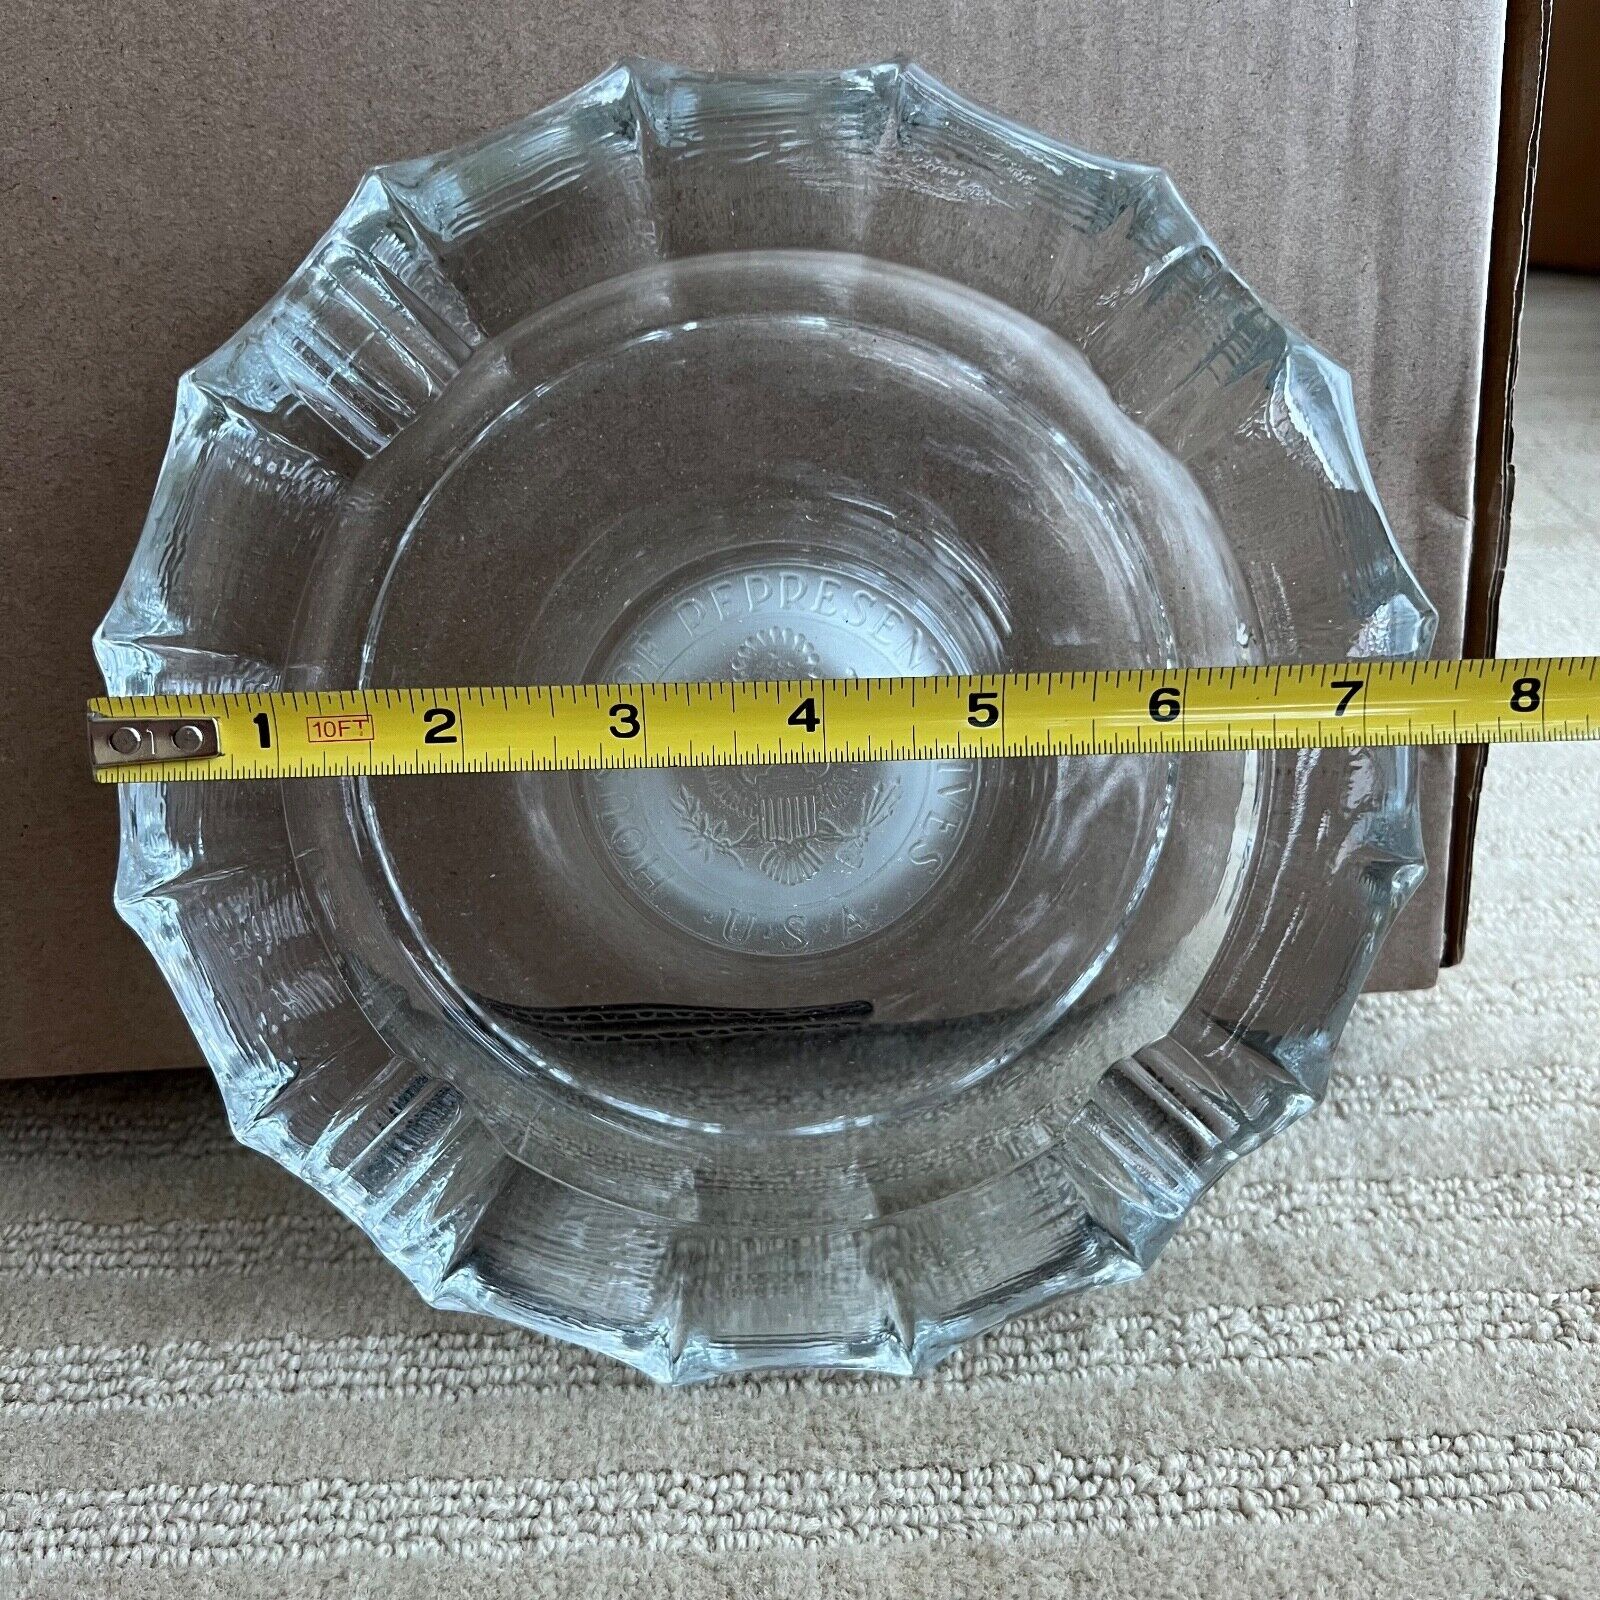 House of Representatives Official USA glass ashtray, 7.5" round, vintage Без бренда